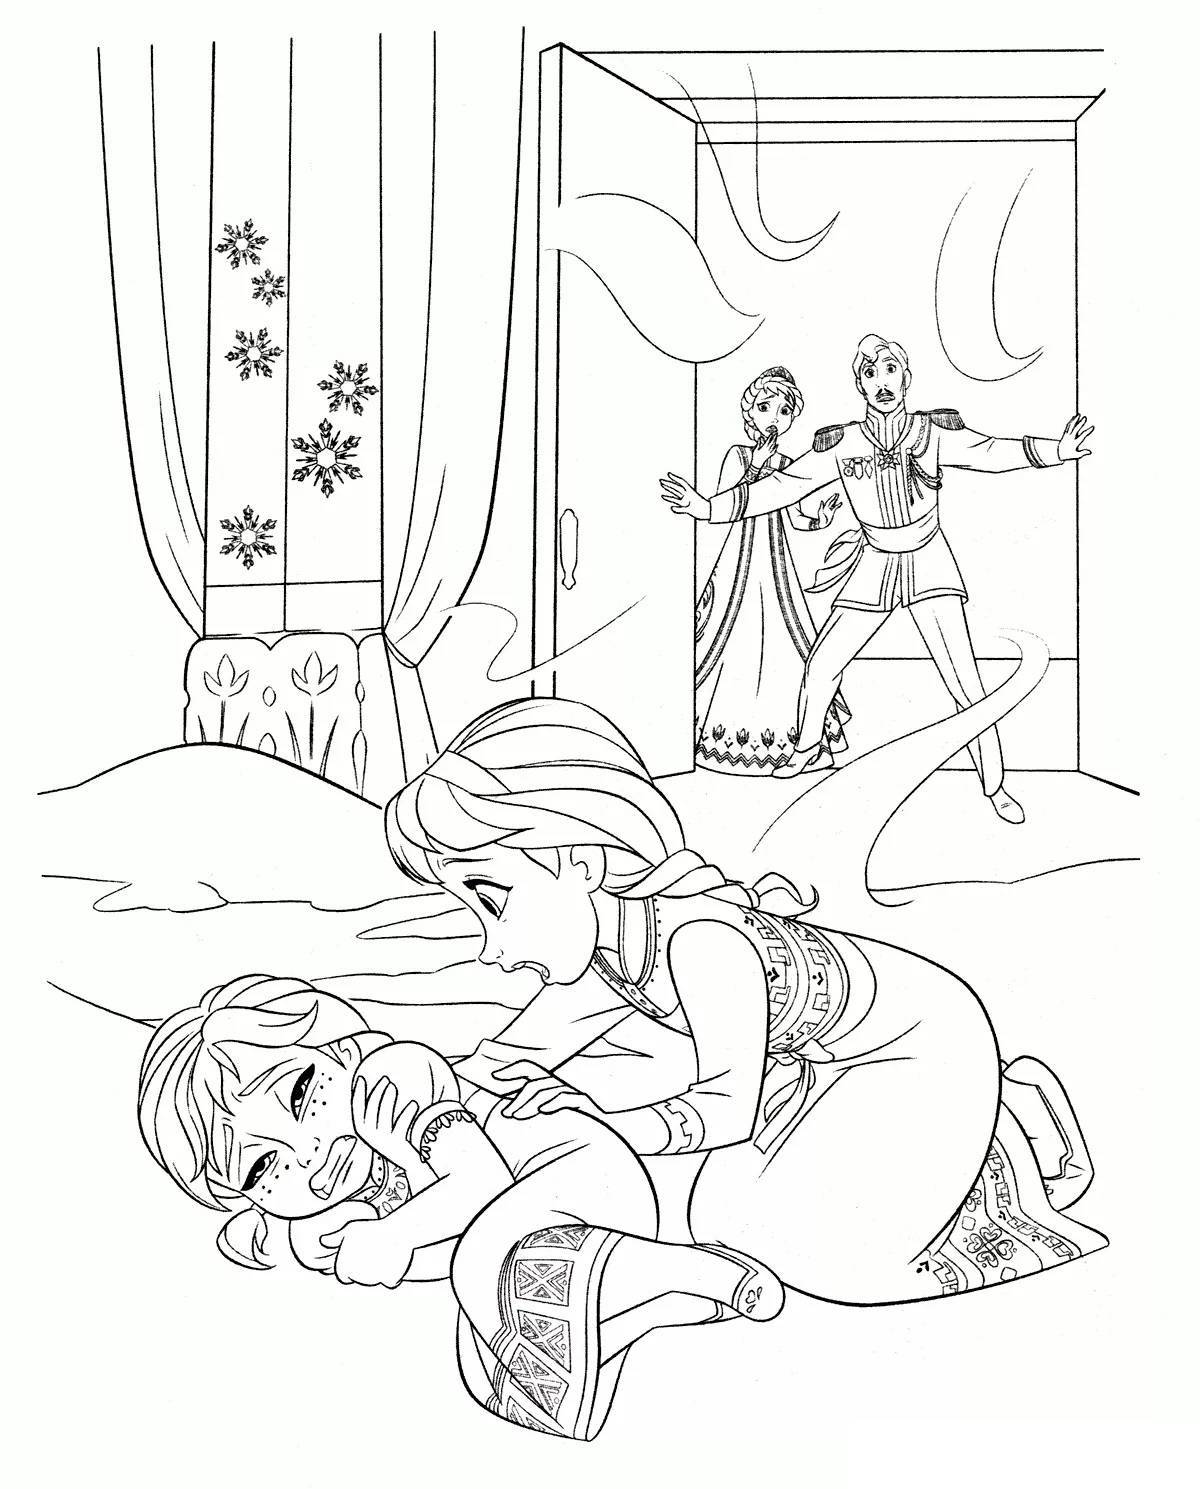 Elsa and Anna Frozen's dazzling coloring book